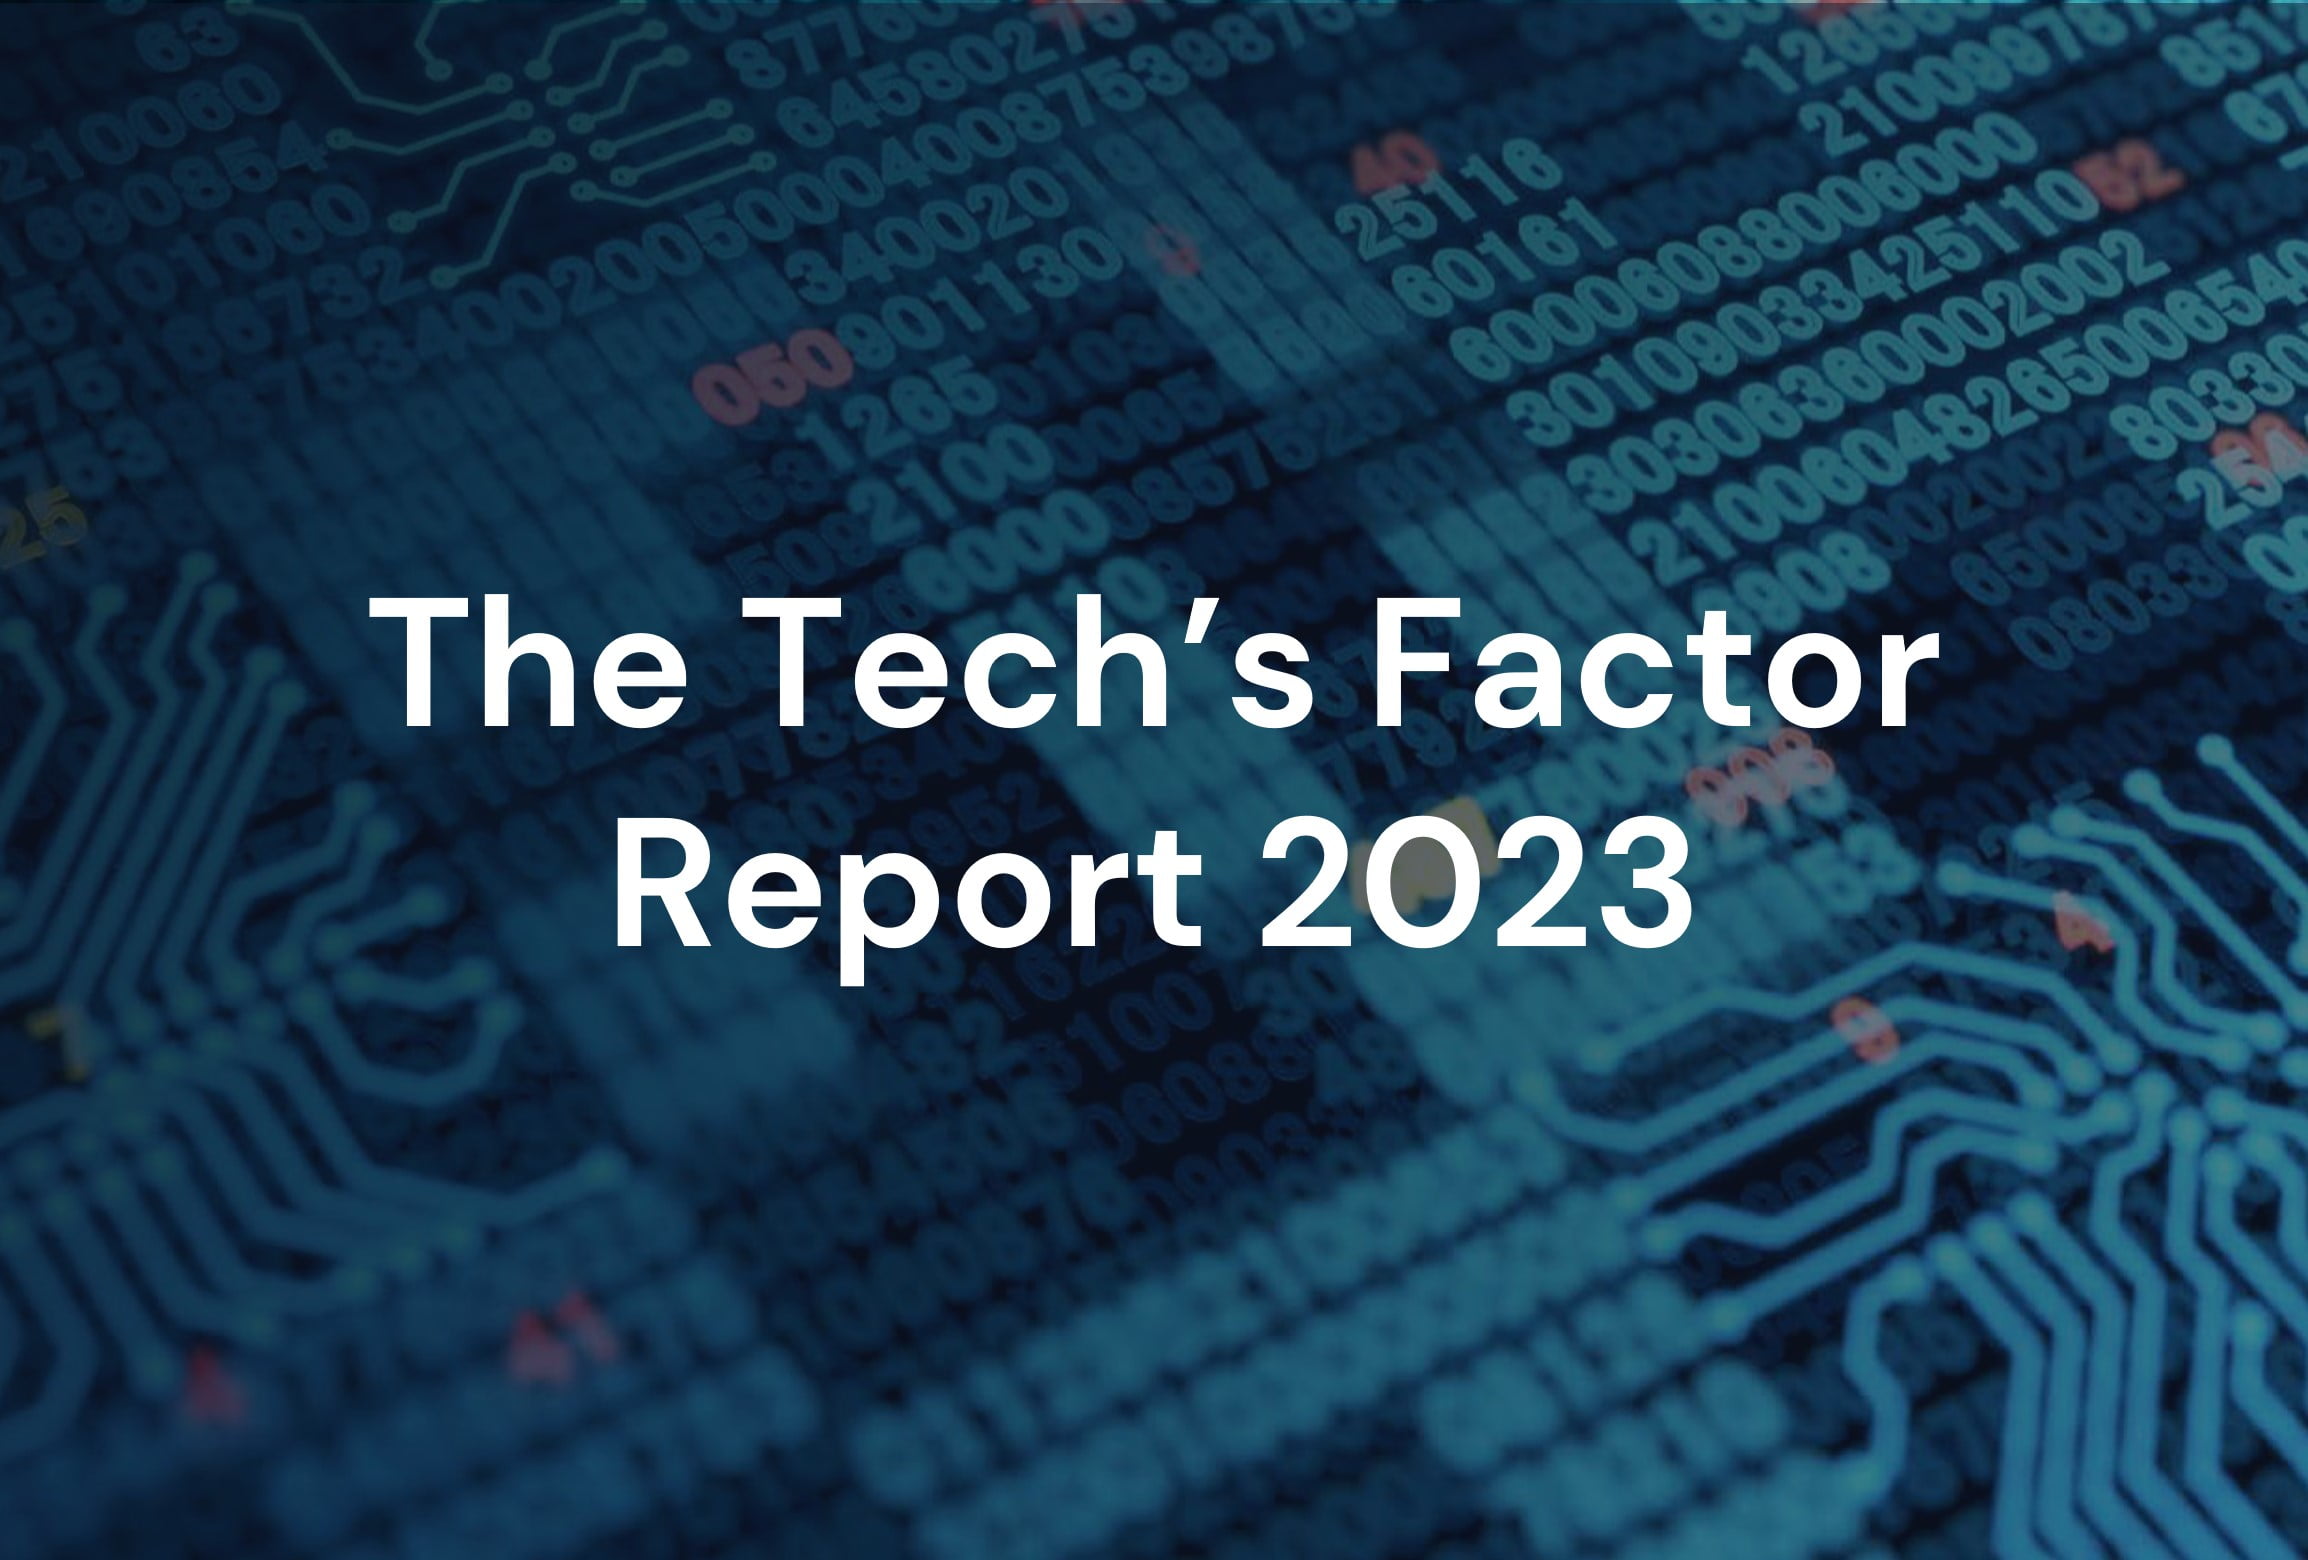 The Tech's Factor Report 2023